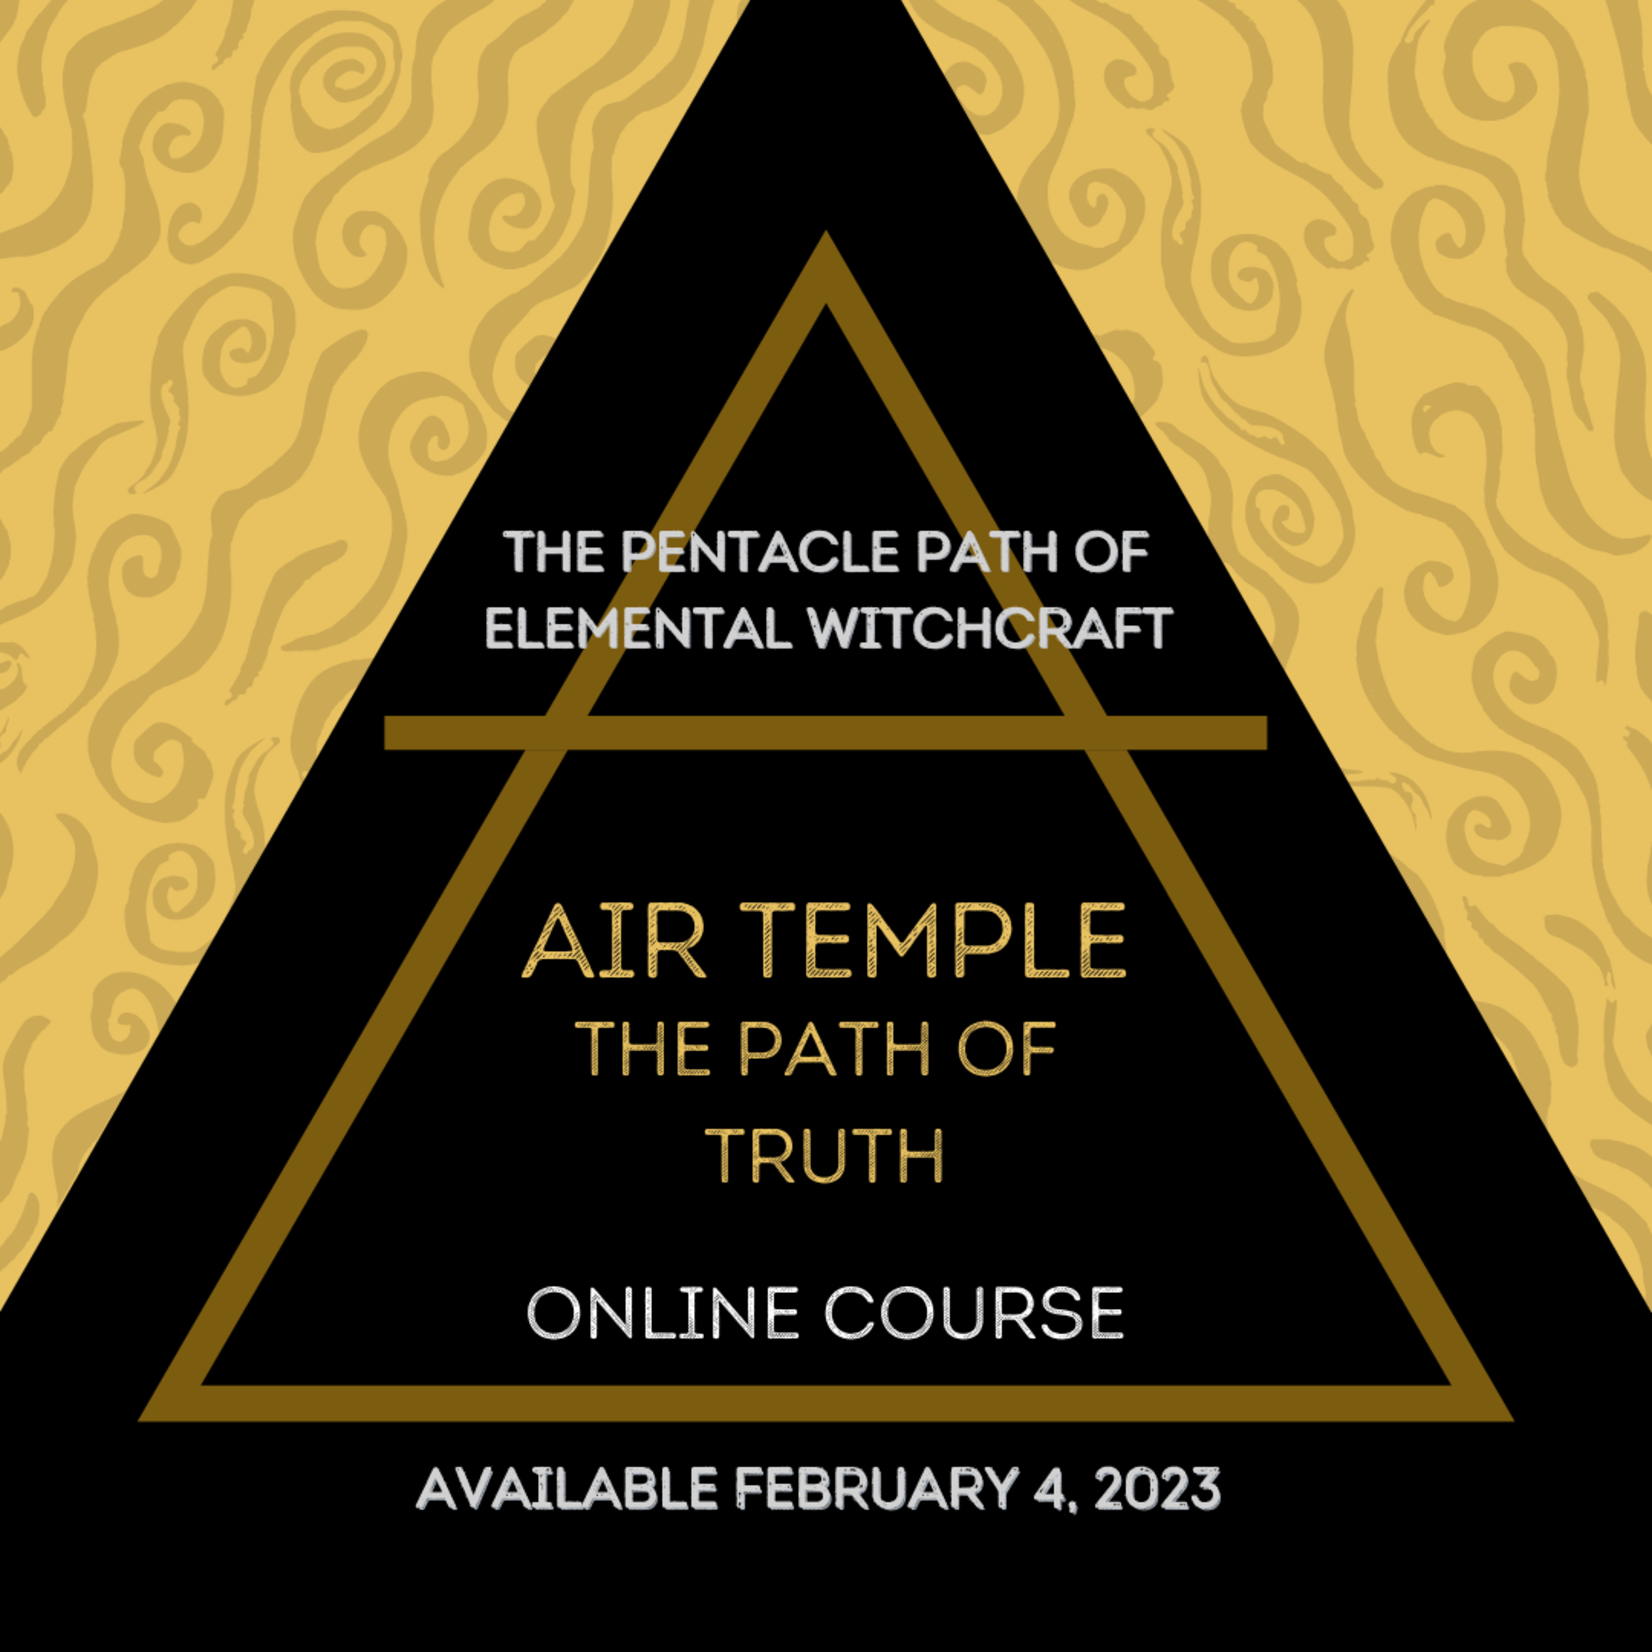 Pentacle Path of Elemental Witchcraft - Online Course